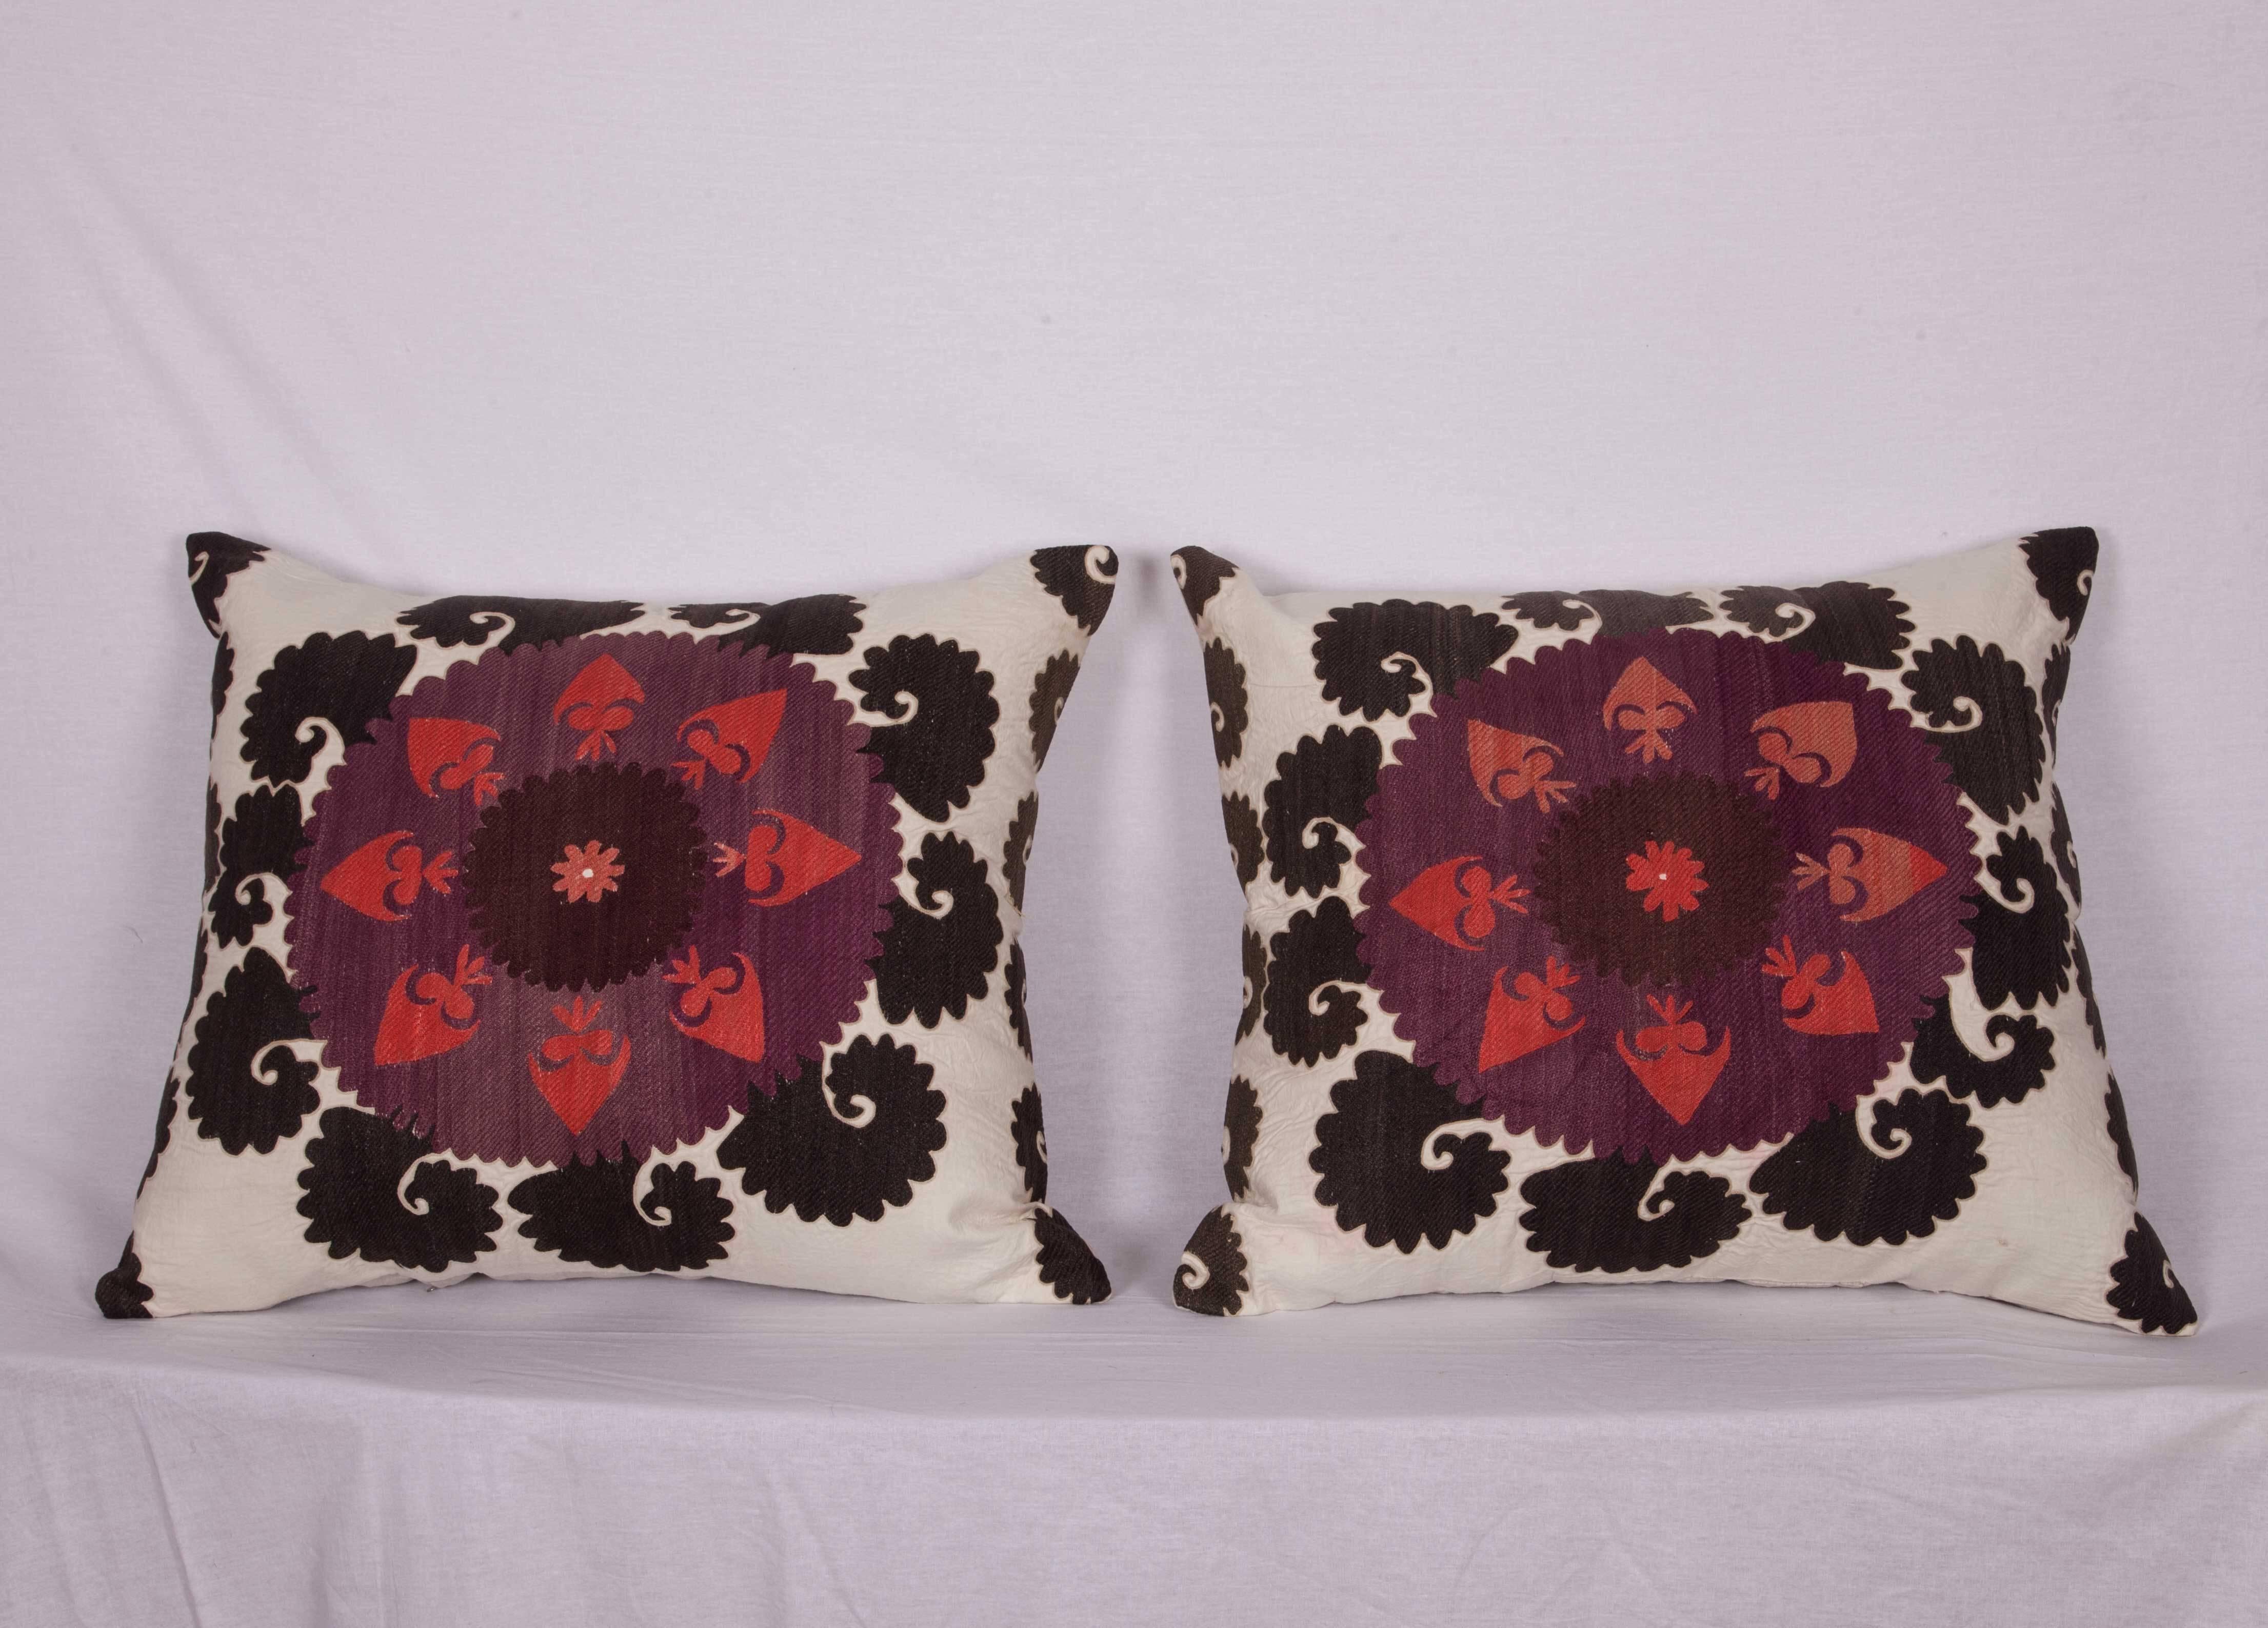 The pillow cases are made out of a mid-20th century, Uzbek Samarkand Suzani. They do not come with an insert but they come with a bag made to the size and out of cotton to accommodate the filling. The backing is made of linen. Please note filling is